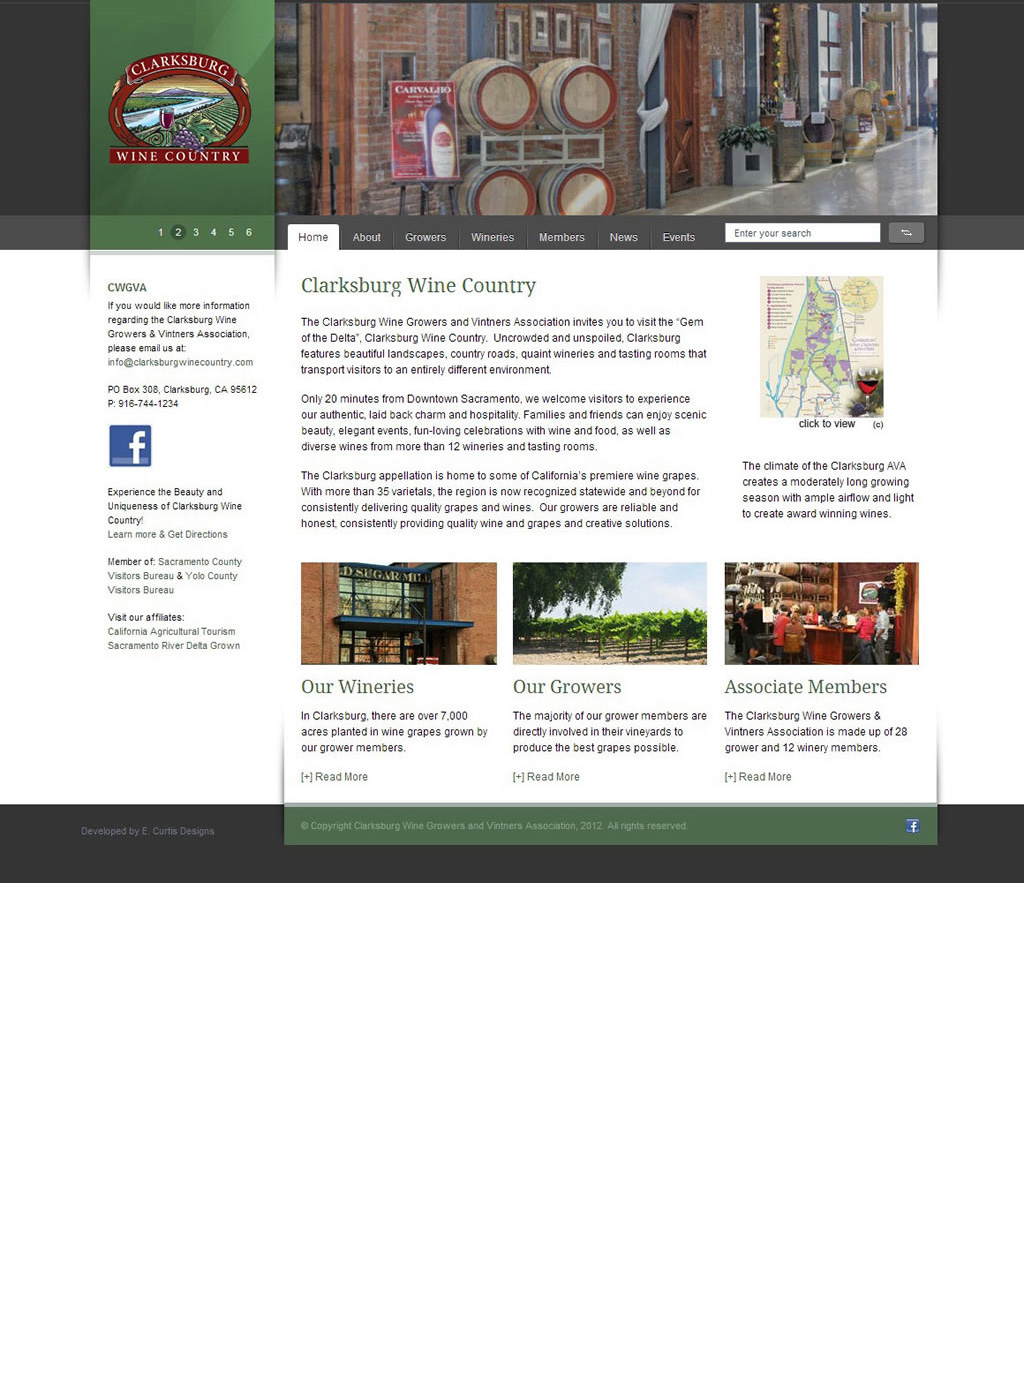 Home page for Clarksburg Wine Country